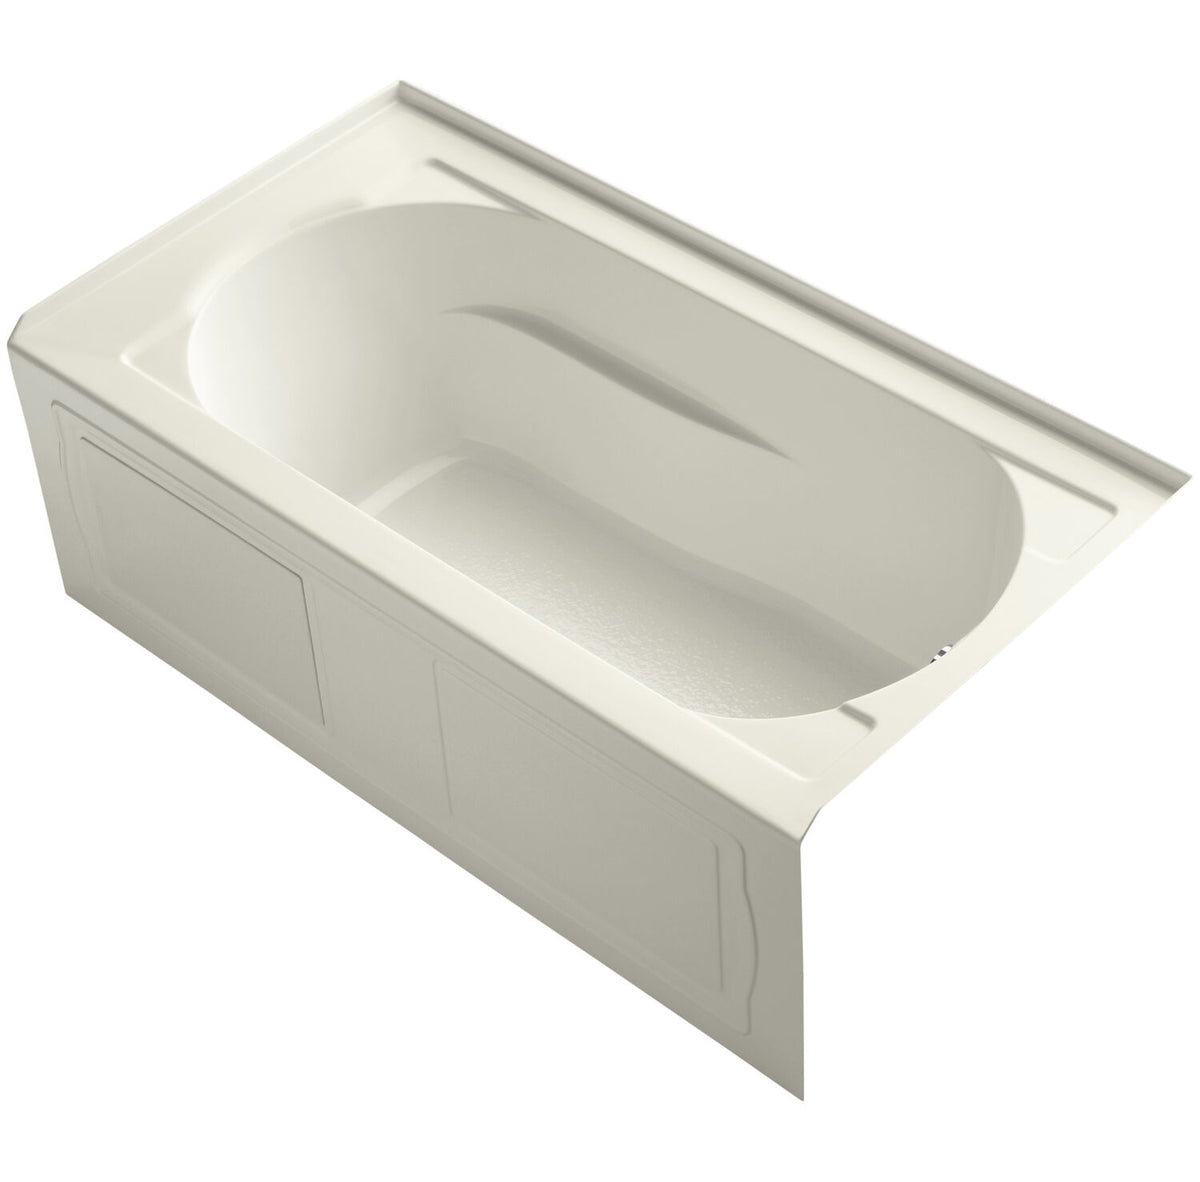 DEVONSHIRE® 60 X 32 INCHES ALCOVE BATHTUB WITH INTEGRAL APRON AND INTEGRAL FLANGE, RIGHT-HAND DRAIN